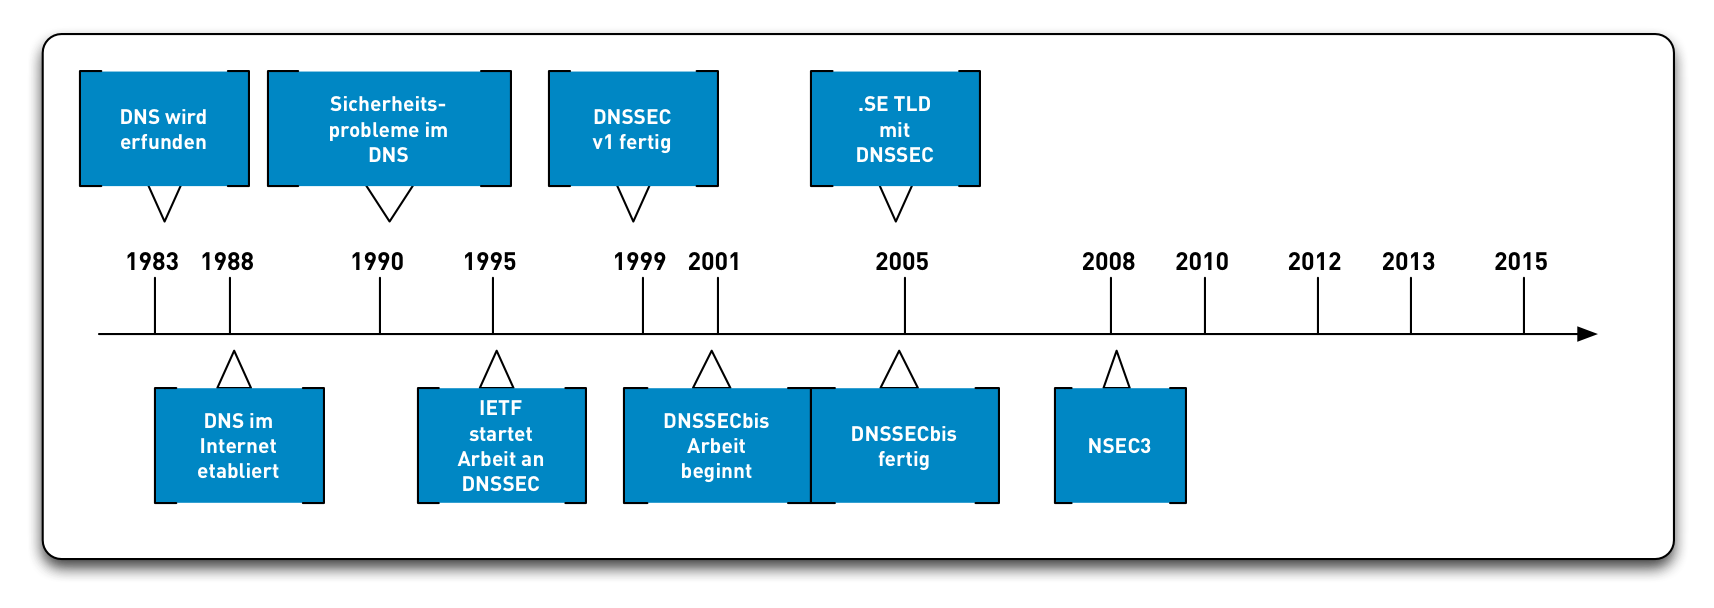 DNSSEC-History10.png